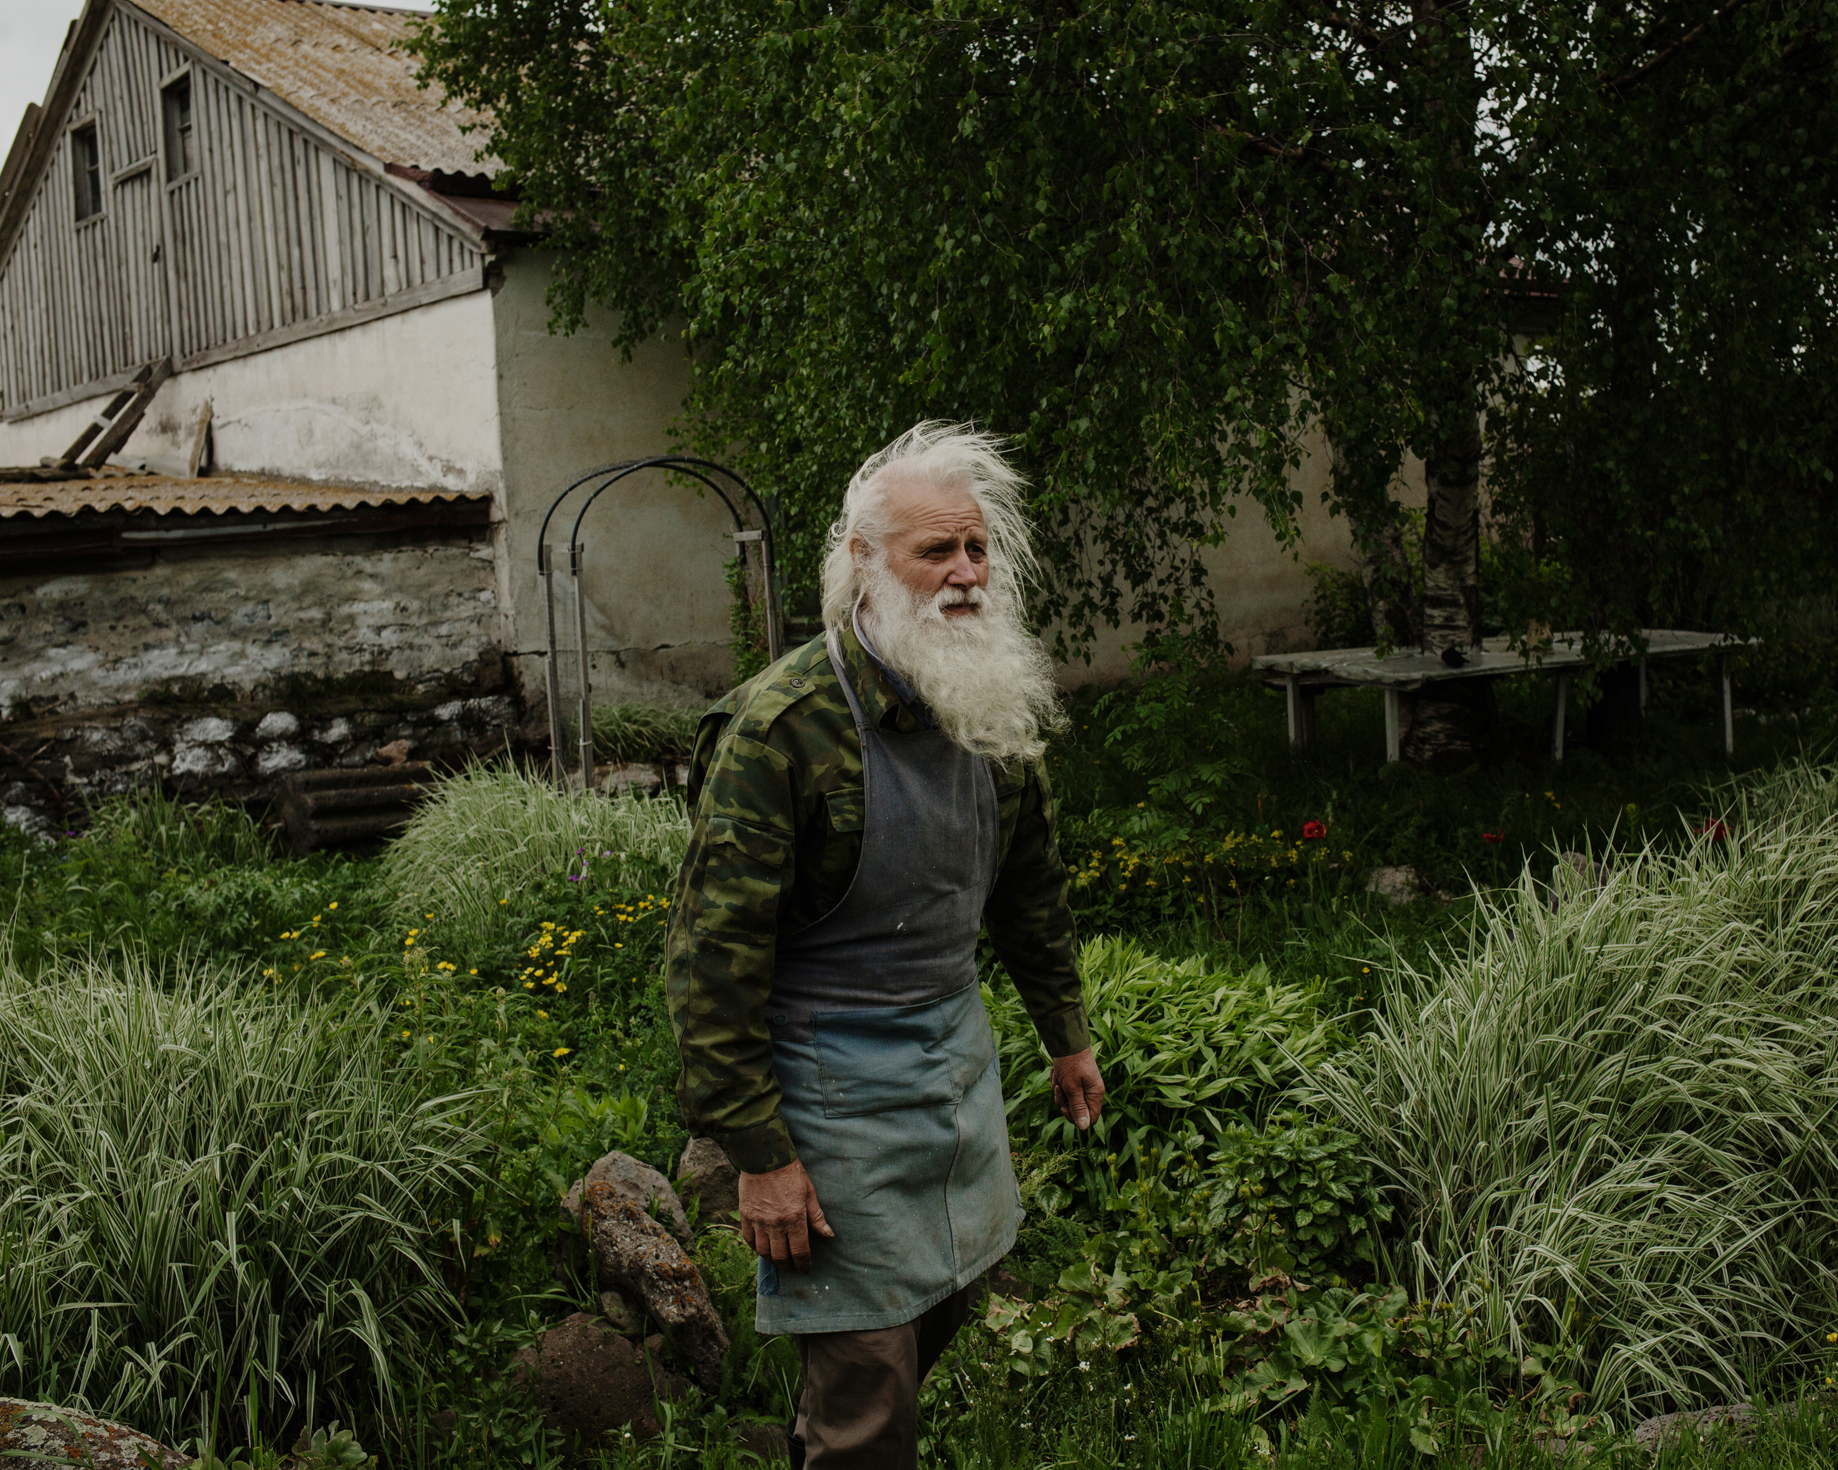  Nikolaï in the middle of his garden where he raises hundreds of different kind of herbs and flowers. He uses it for eating and traditional medicine. Doukhobors are know for their traditional way of life. 